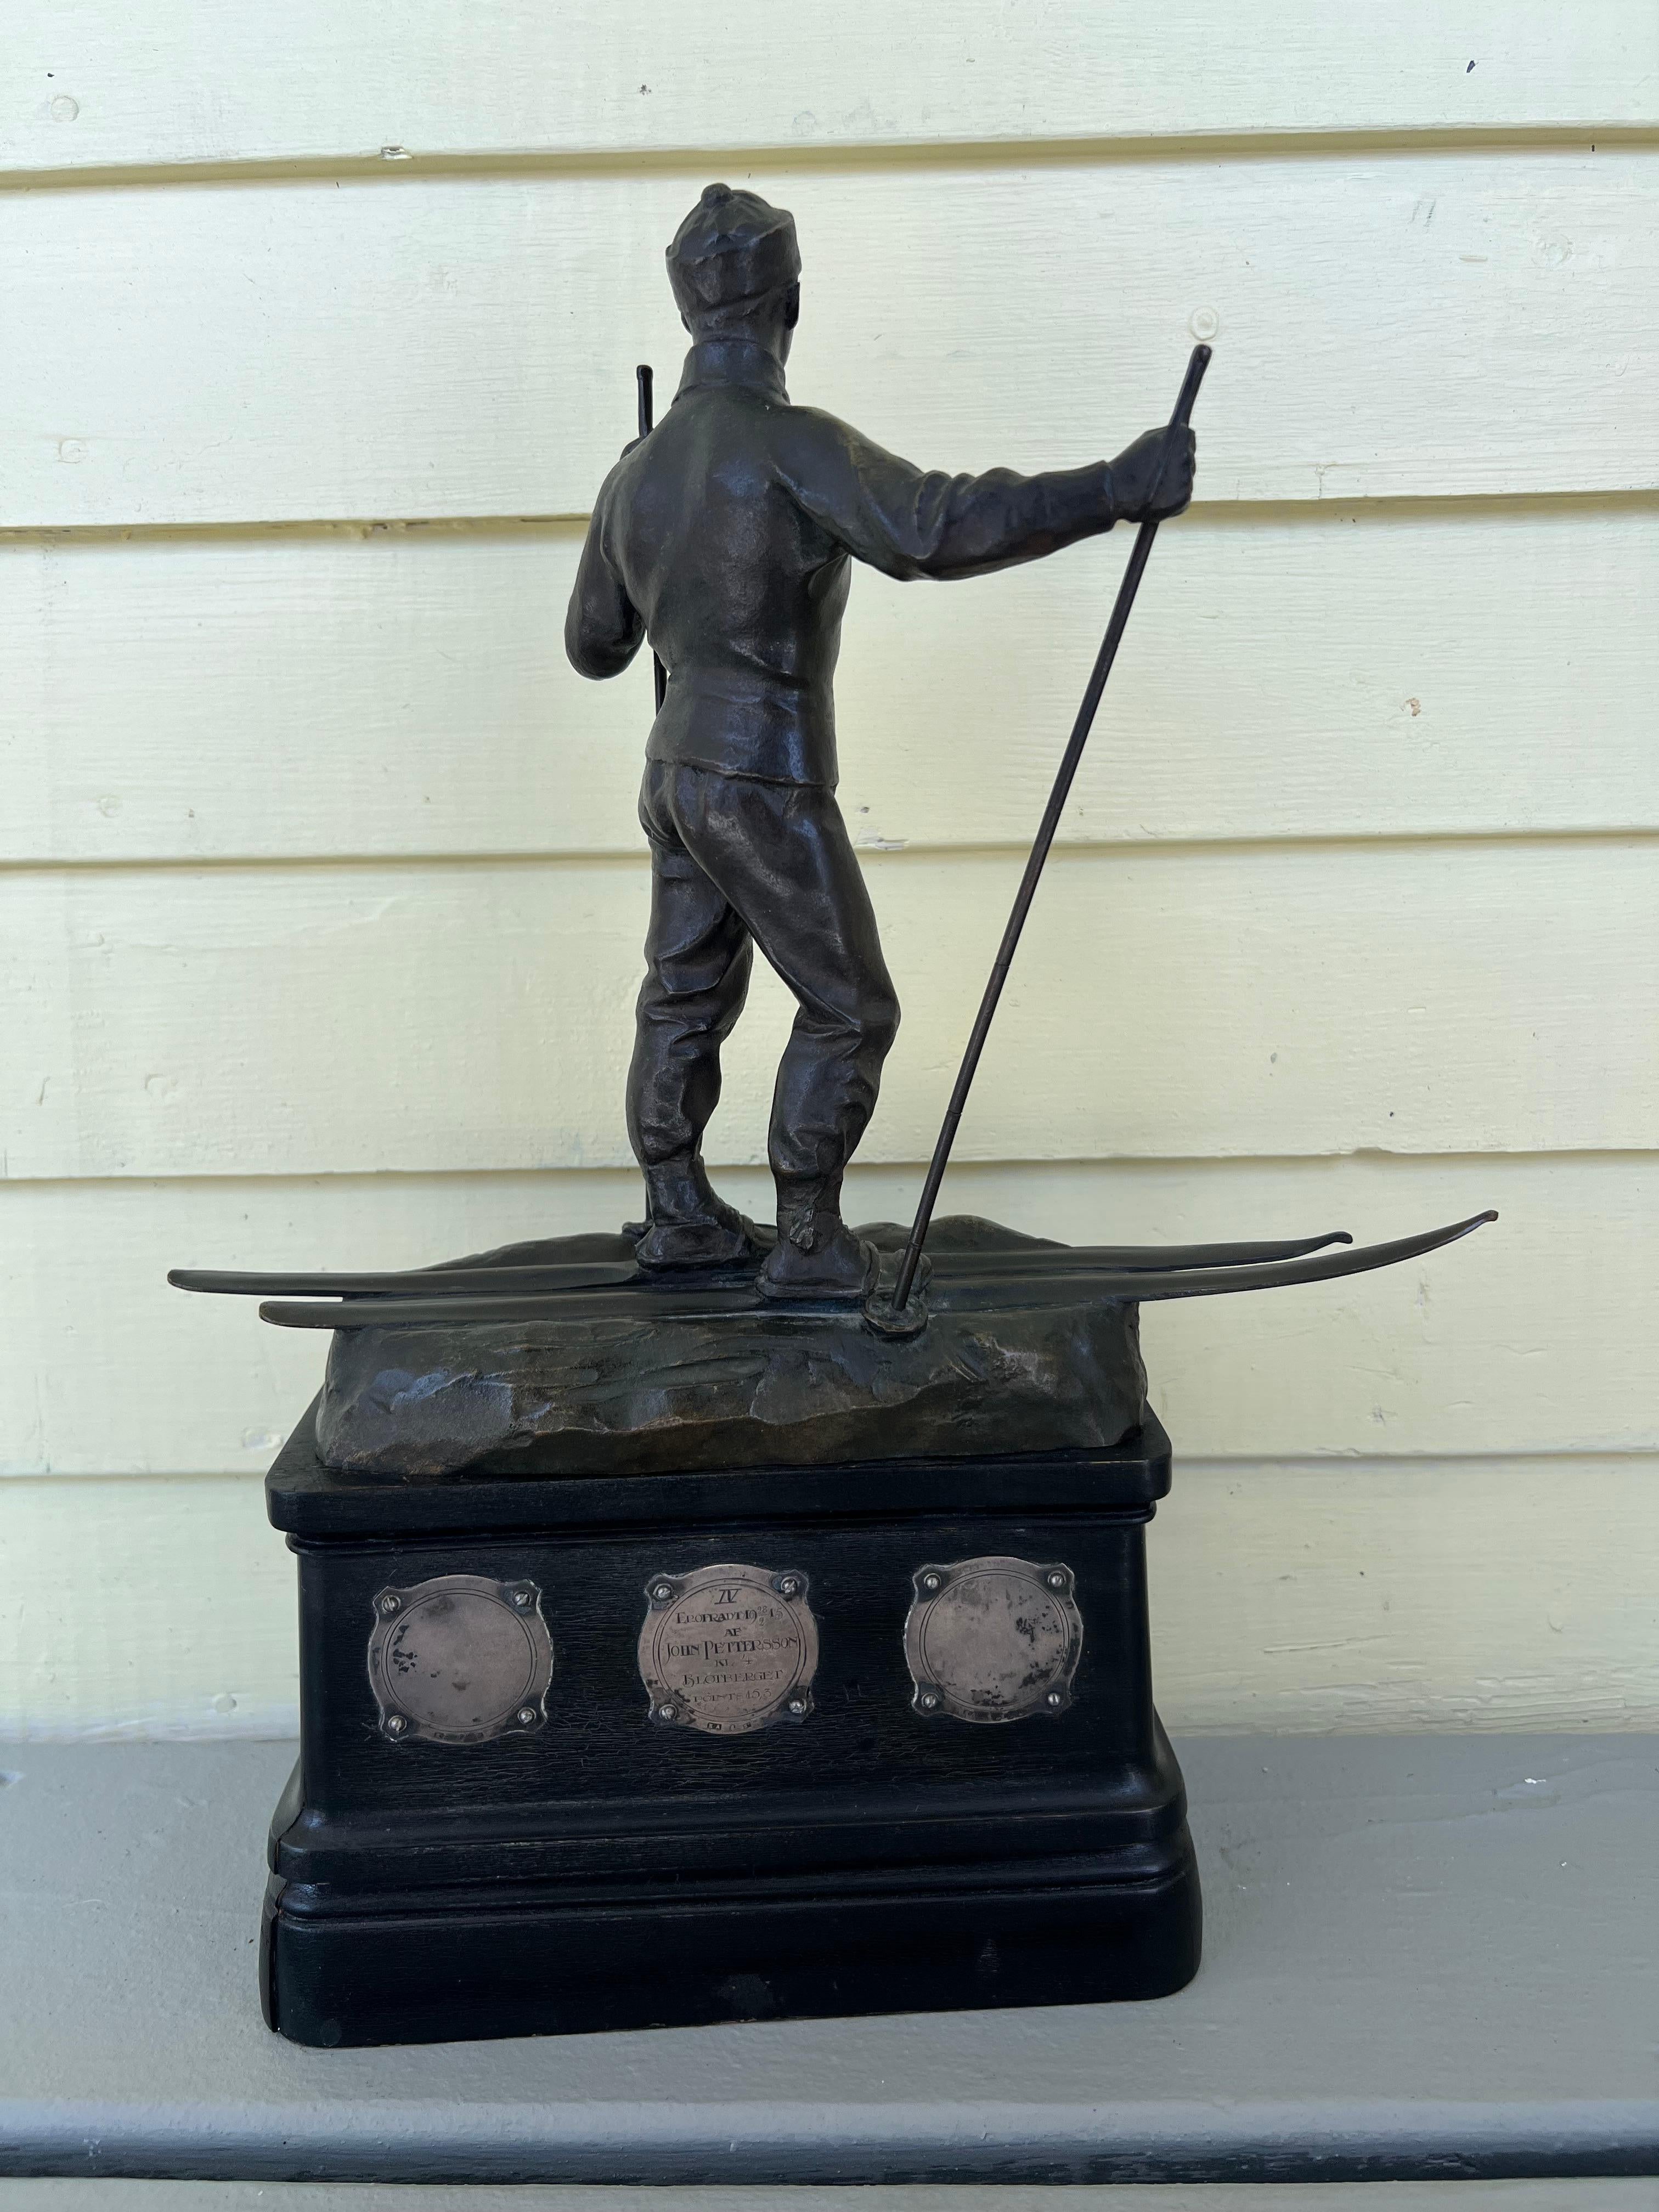 Rare Early 20th Century Skiing Award from Sweden with Bronze by Gerda Sprinchorn 1